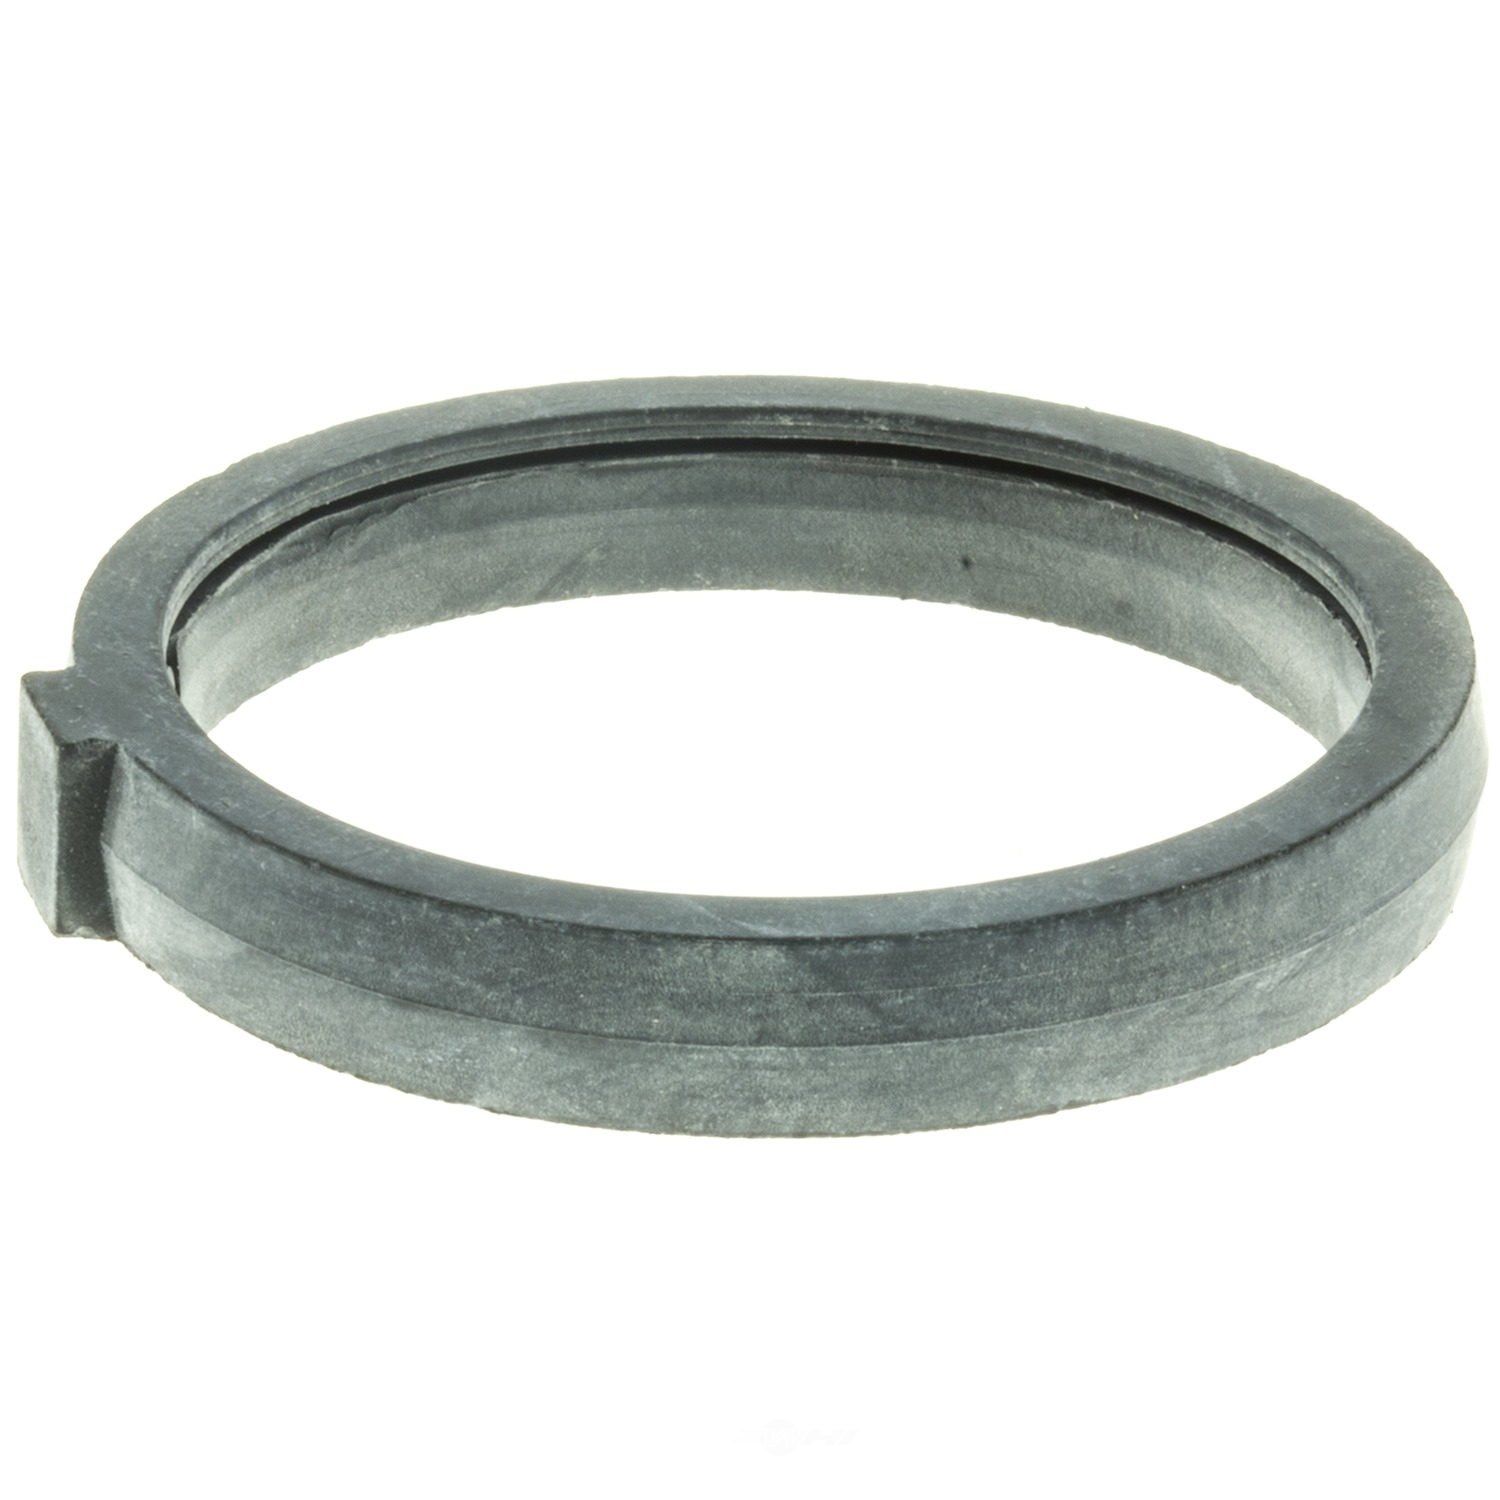 STANT - Thermostat Seal - STN 27288